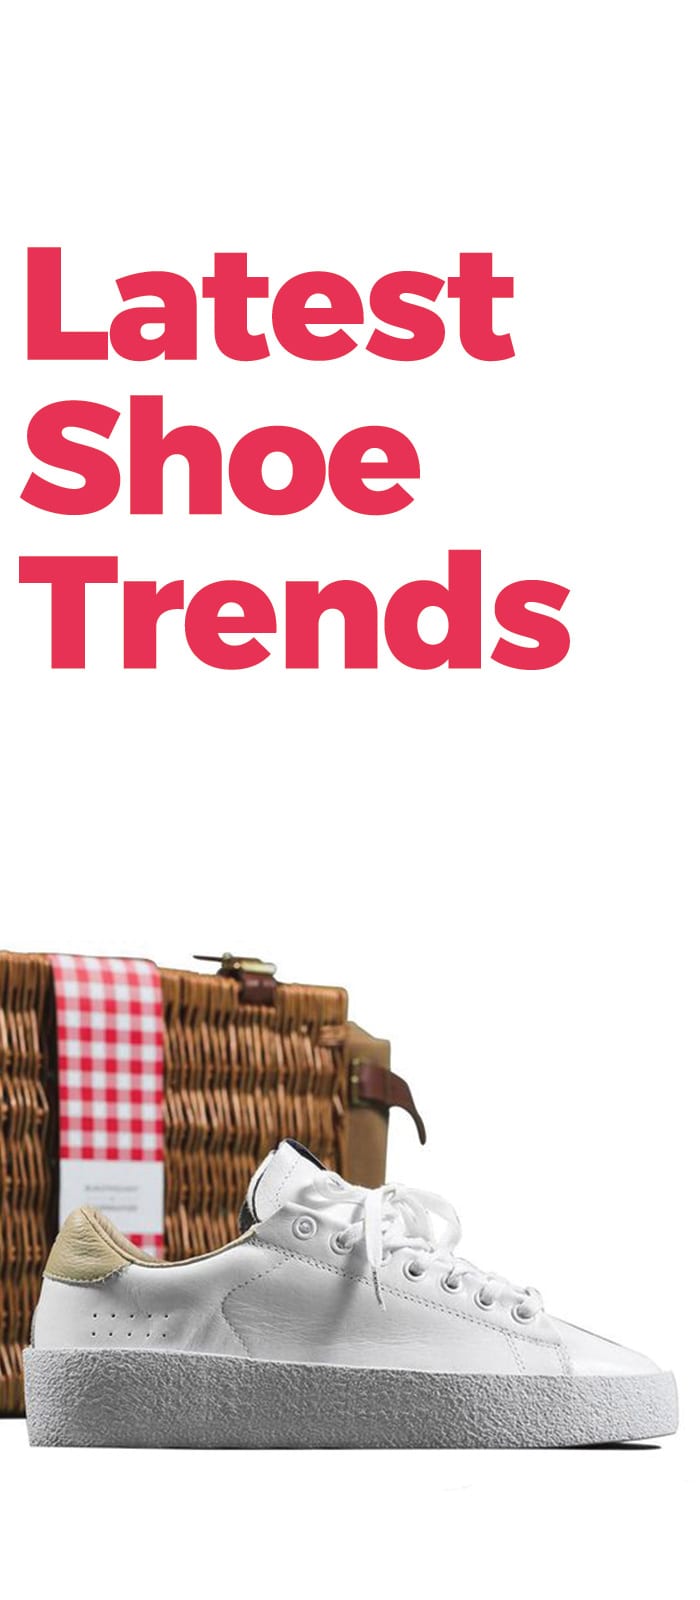 2018 Shoe Style trends